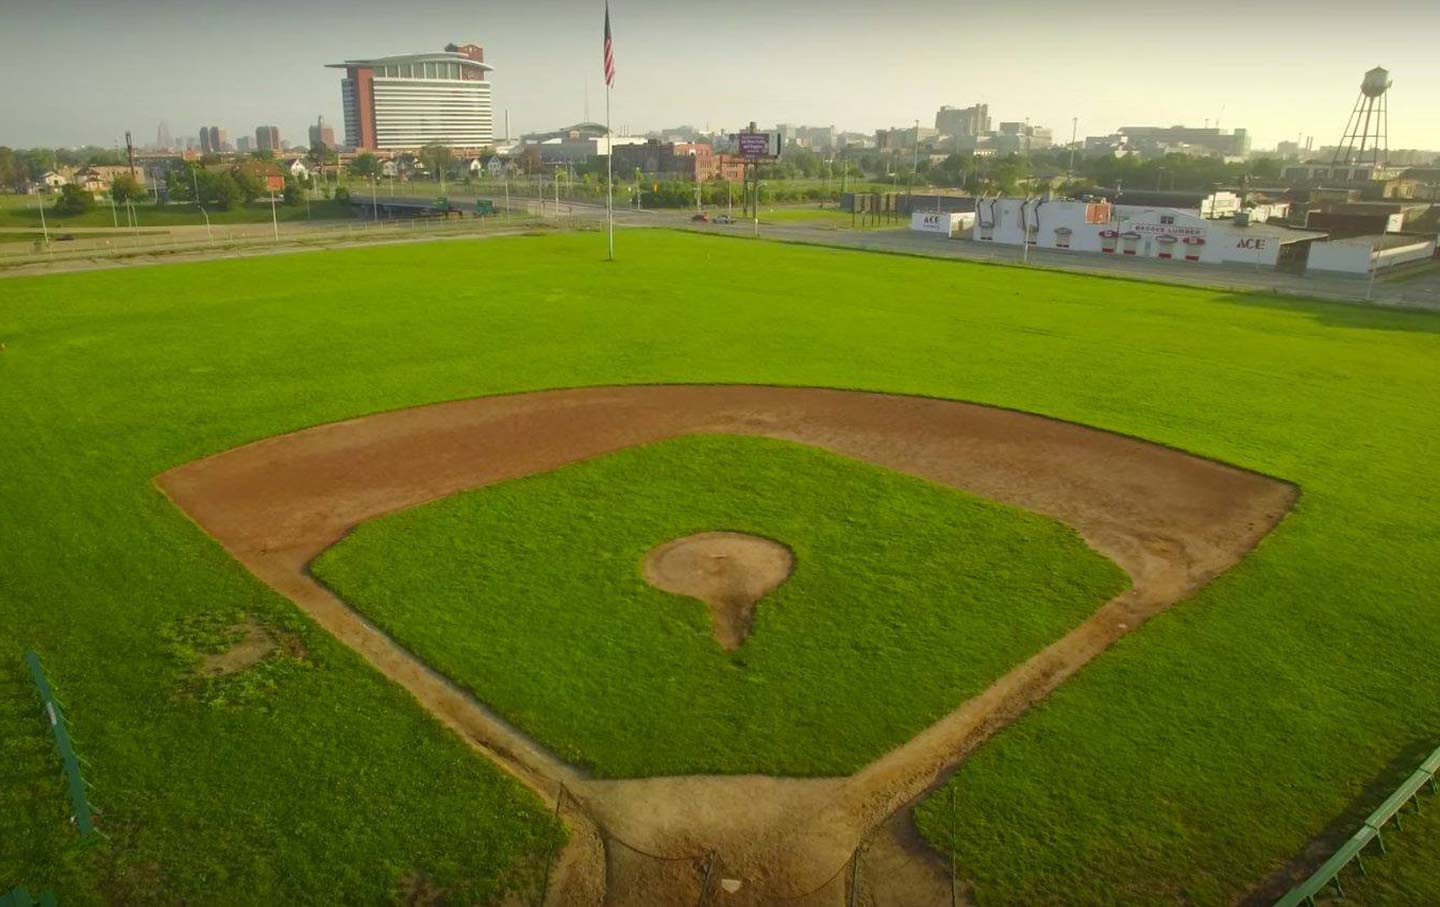 The Plan for Detroit’s Former Tiger Stadium Ignores History—and Potentially Safety